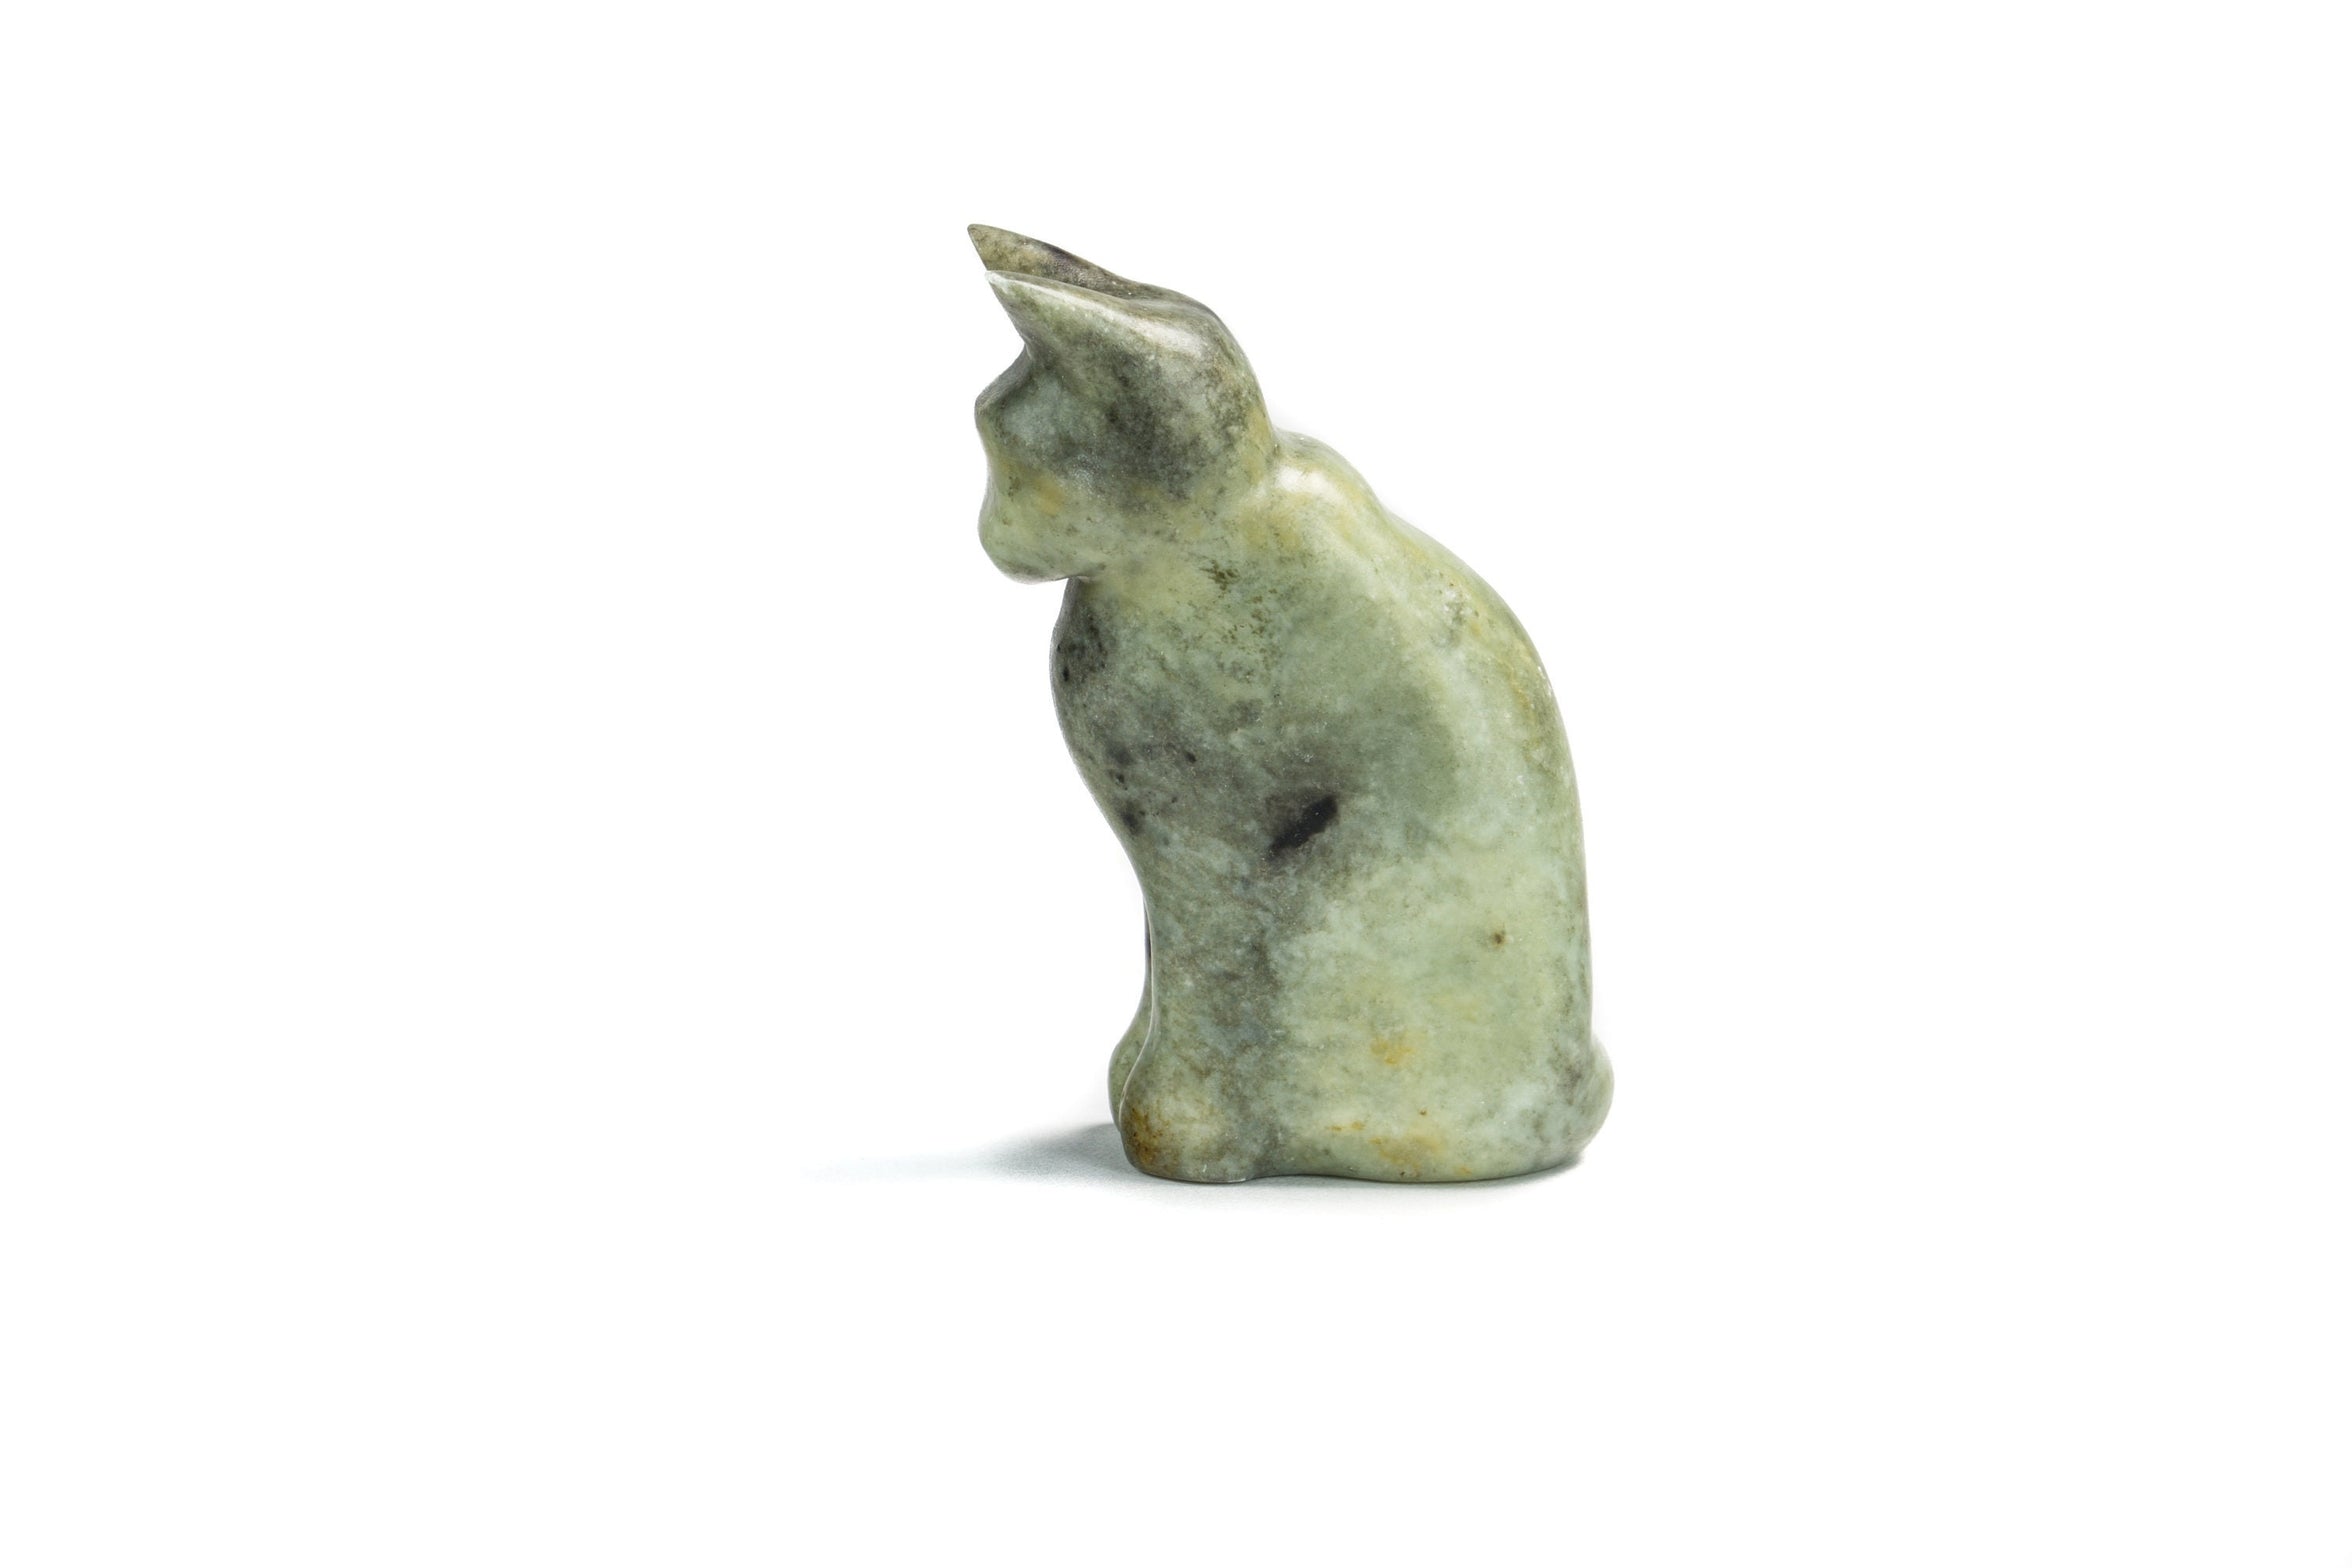 CAUK Cat Soapstone Carving and Whittling